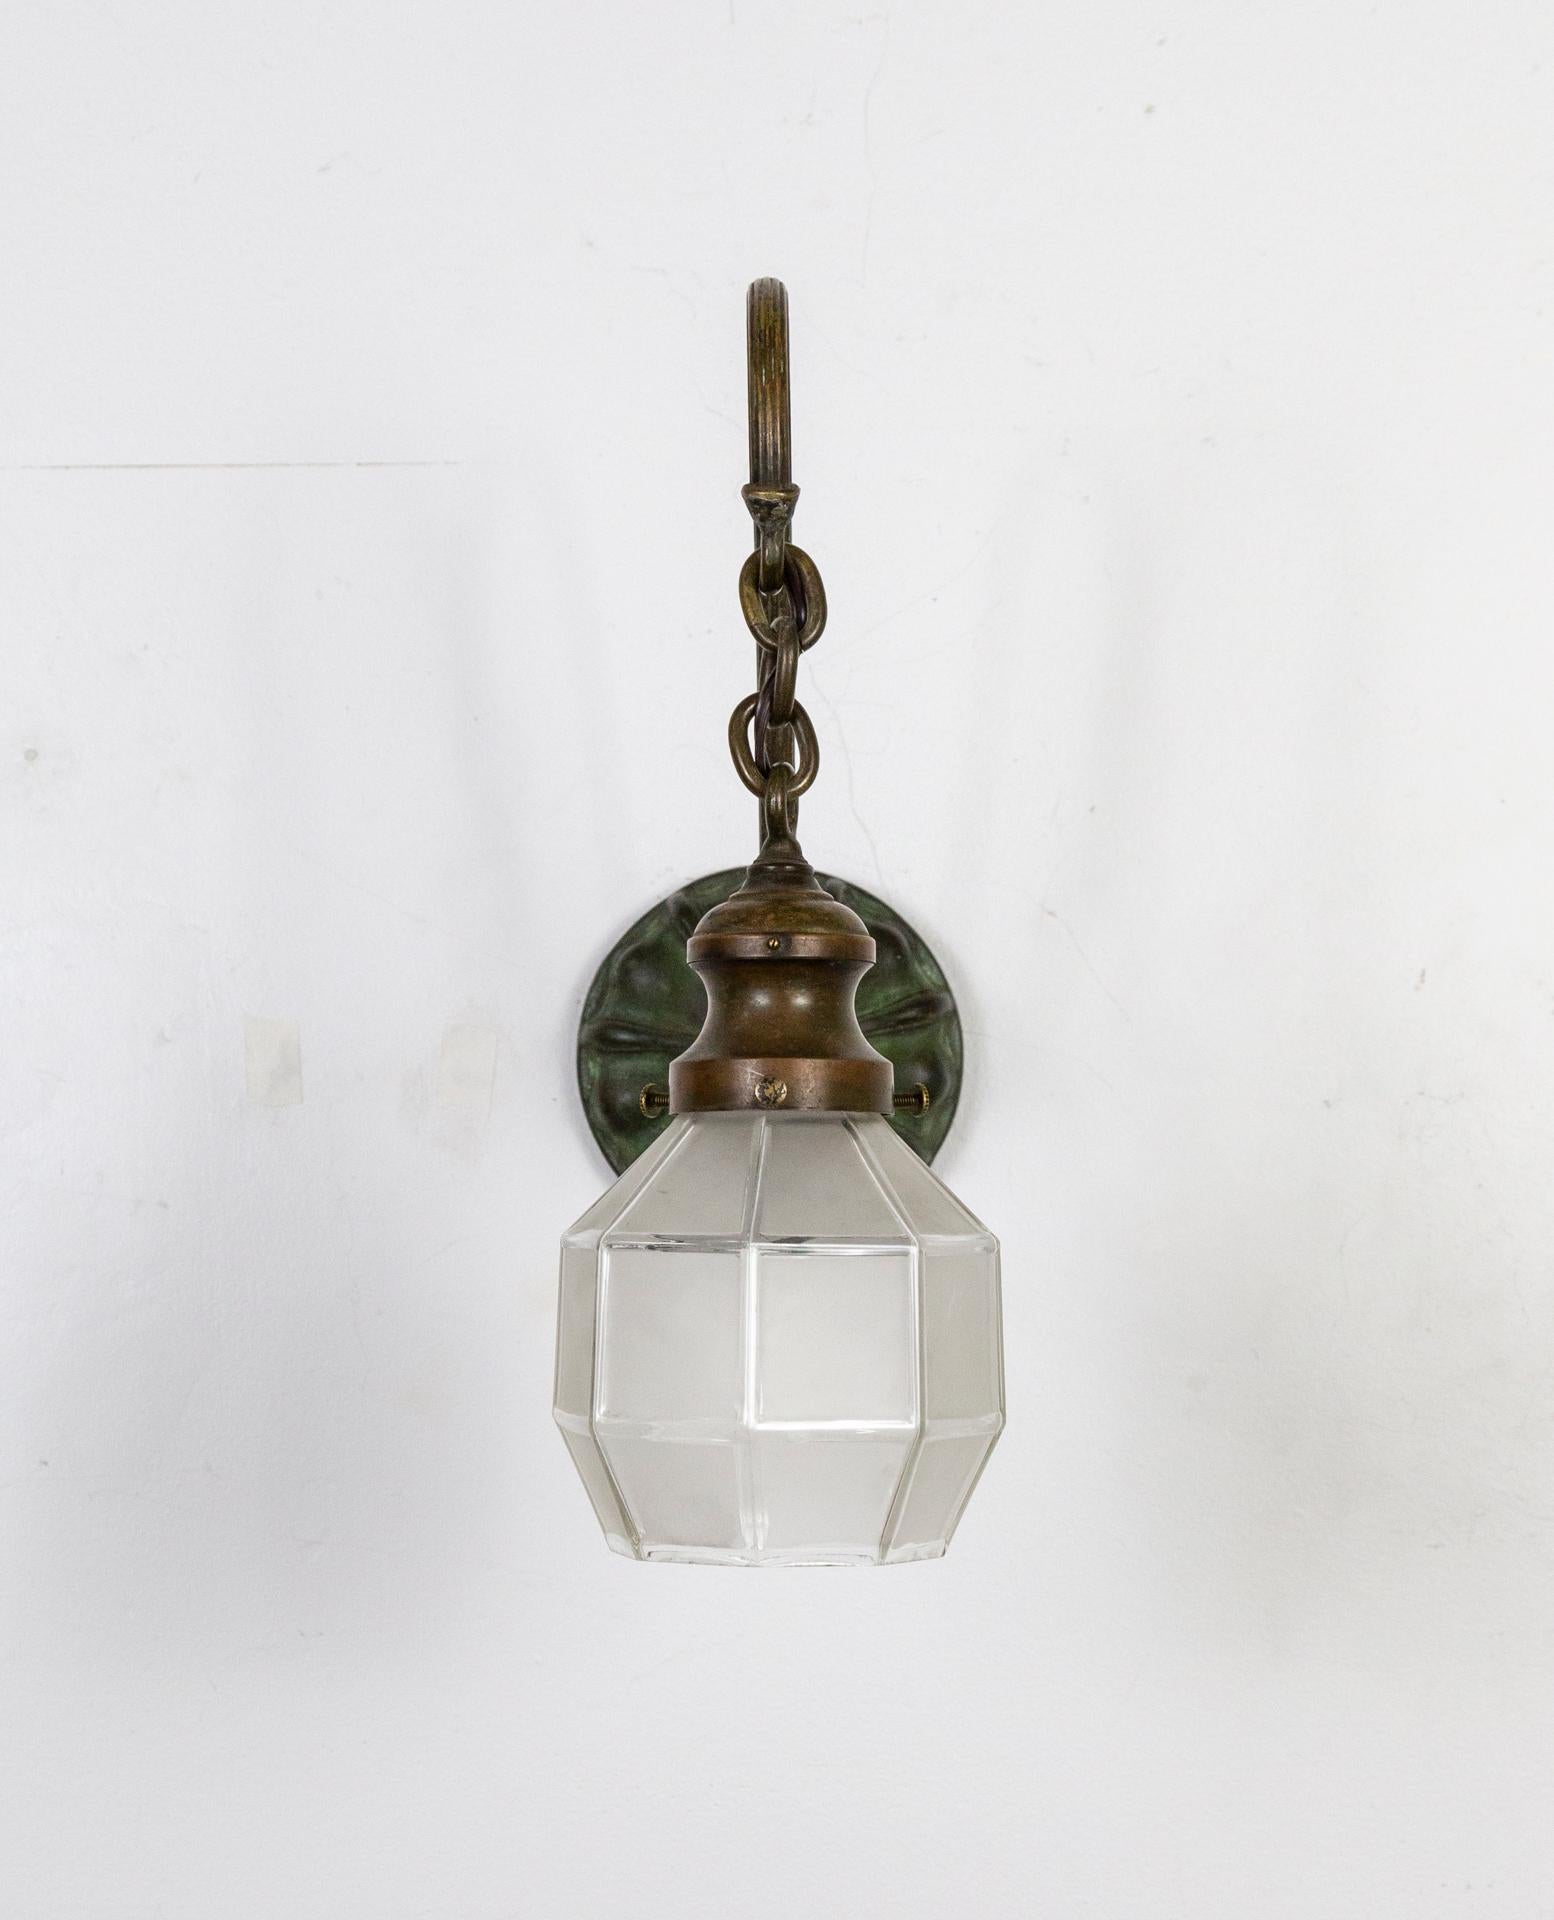 A pair of Victorian Era wall sconces with reeded, swooping arms and Sheffield style back plates. A rich patina throughout in verdigris and bronze tones with chain and shade holder adding to the overall shape. The shades are soft edged, faceted,